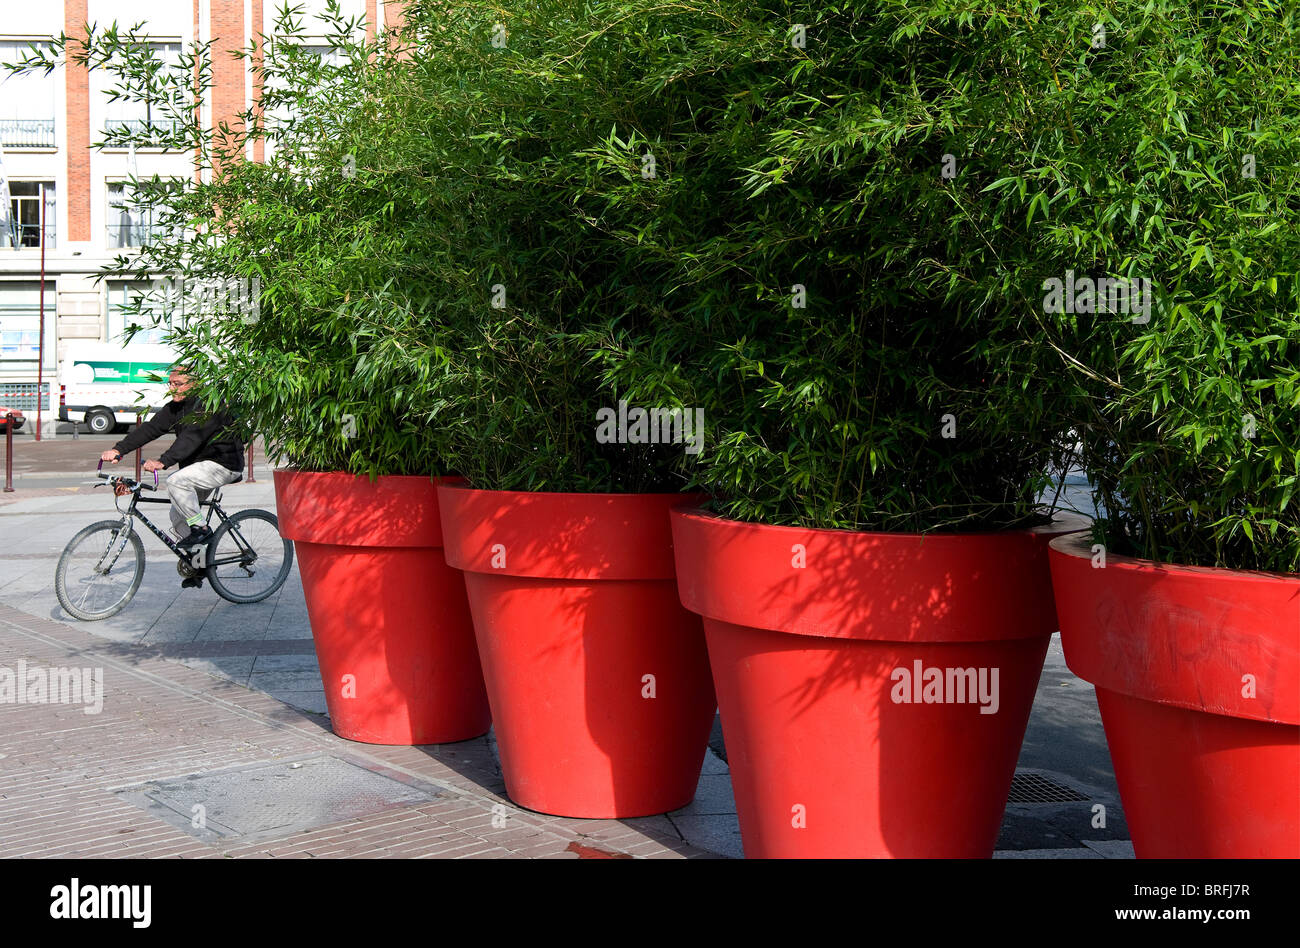 large red flower pots, lille, france Stock Photo